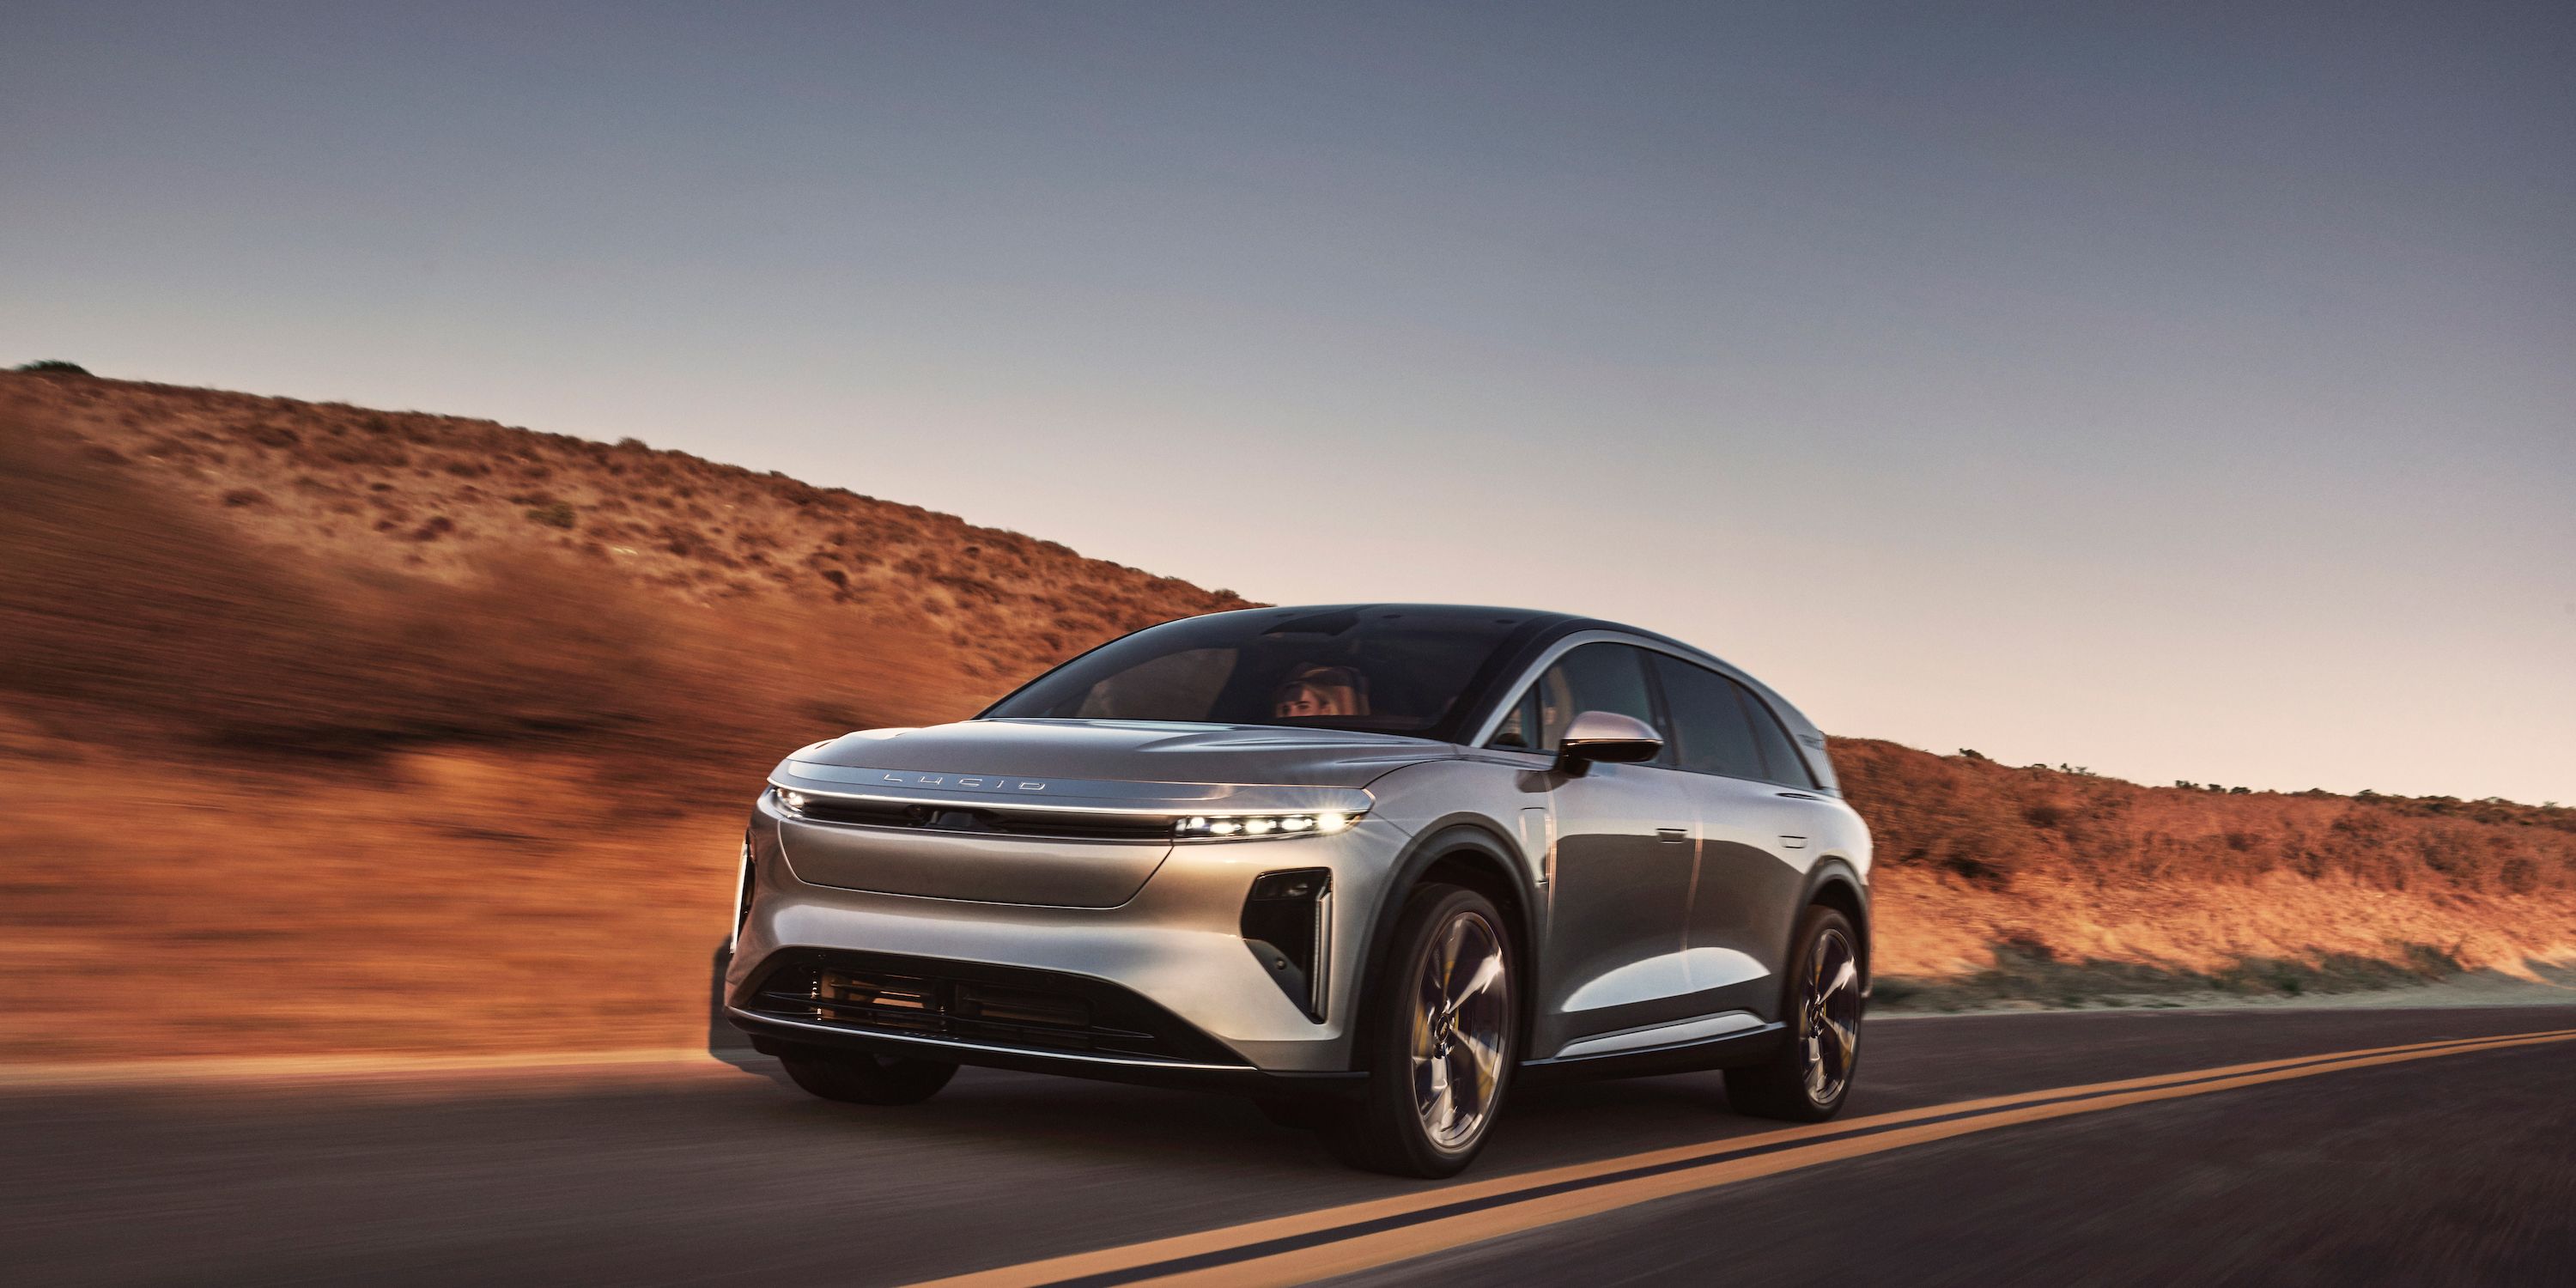 The Lucid Gravity SUV Brings Big Range But Uses Half the Battery of Mainstream Carmakers